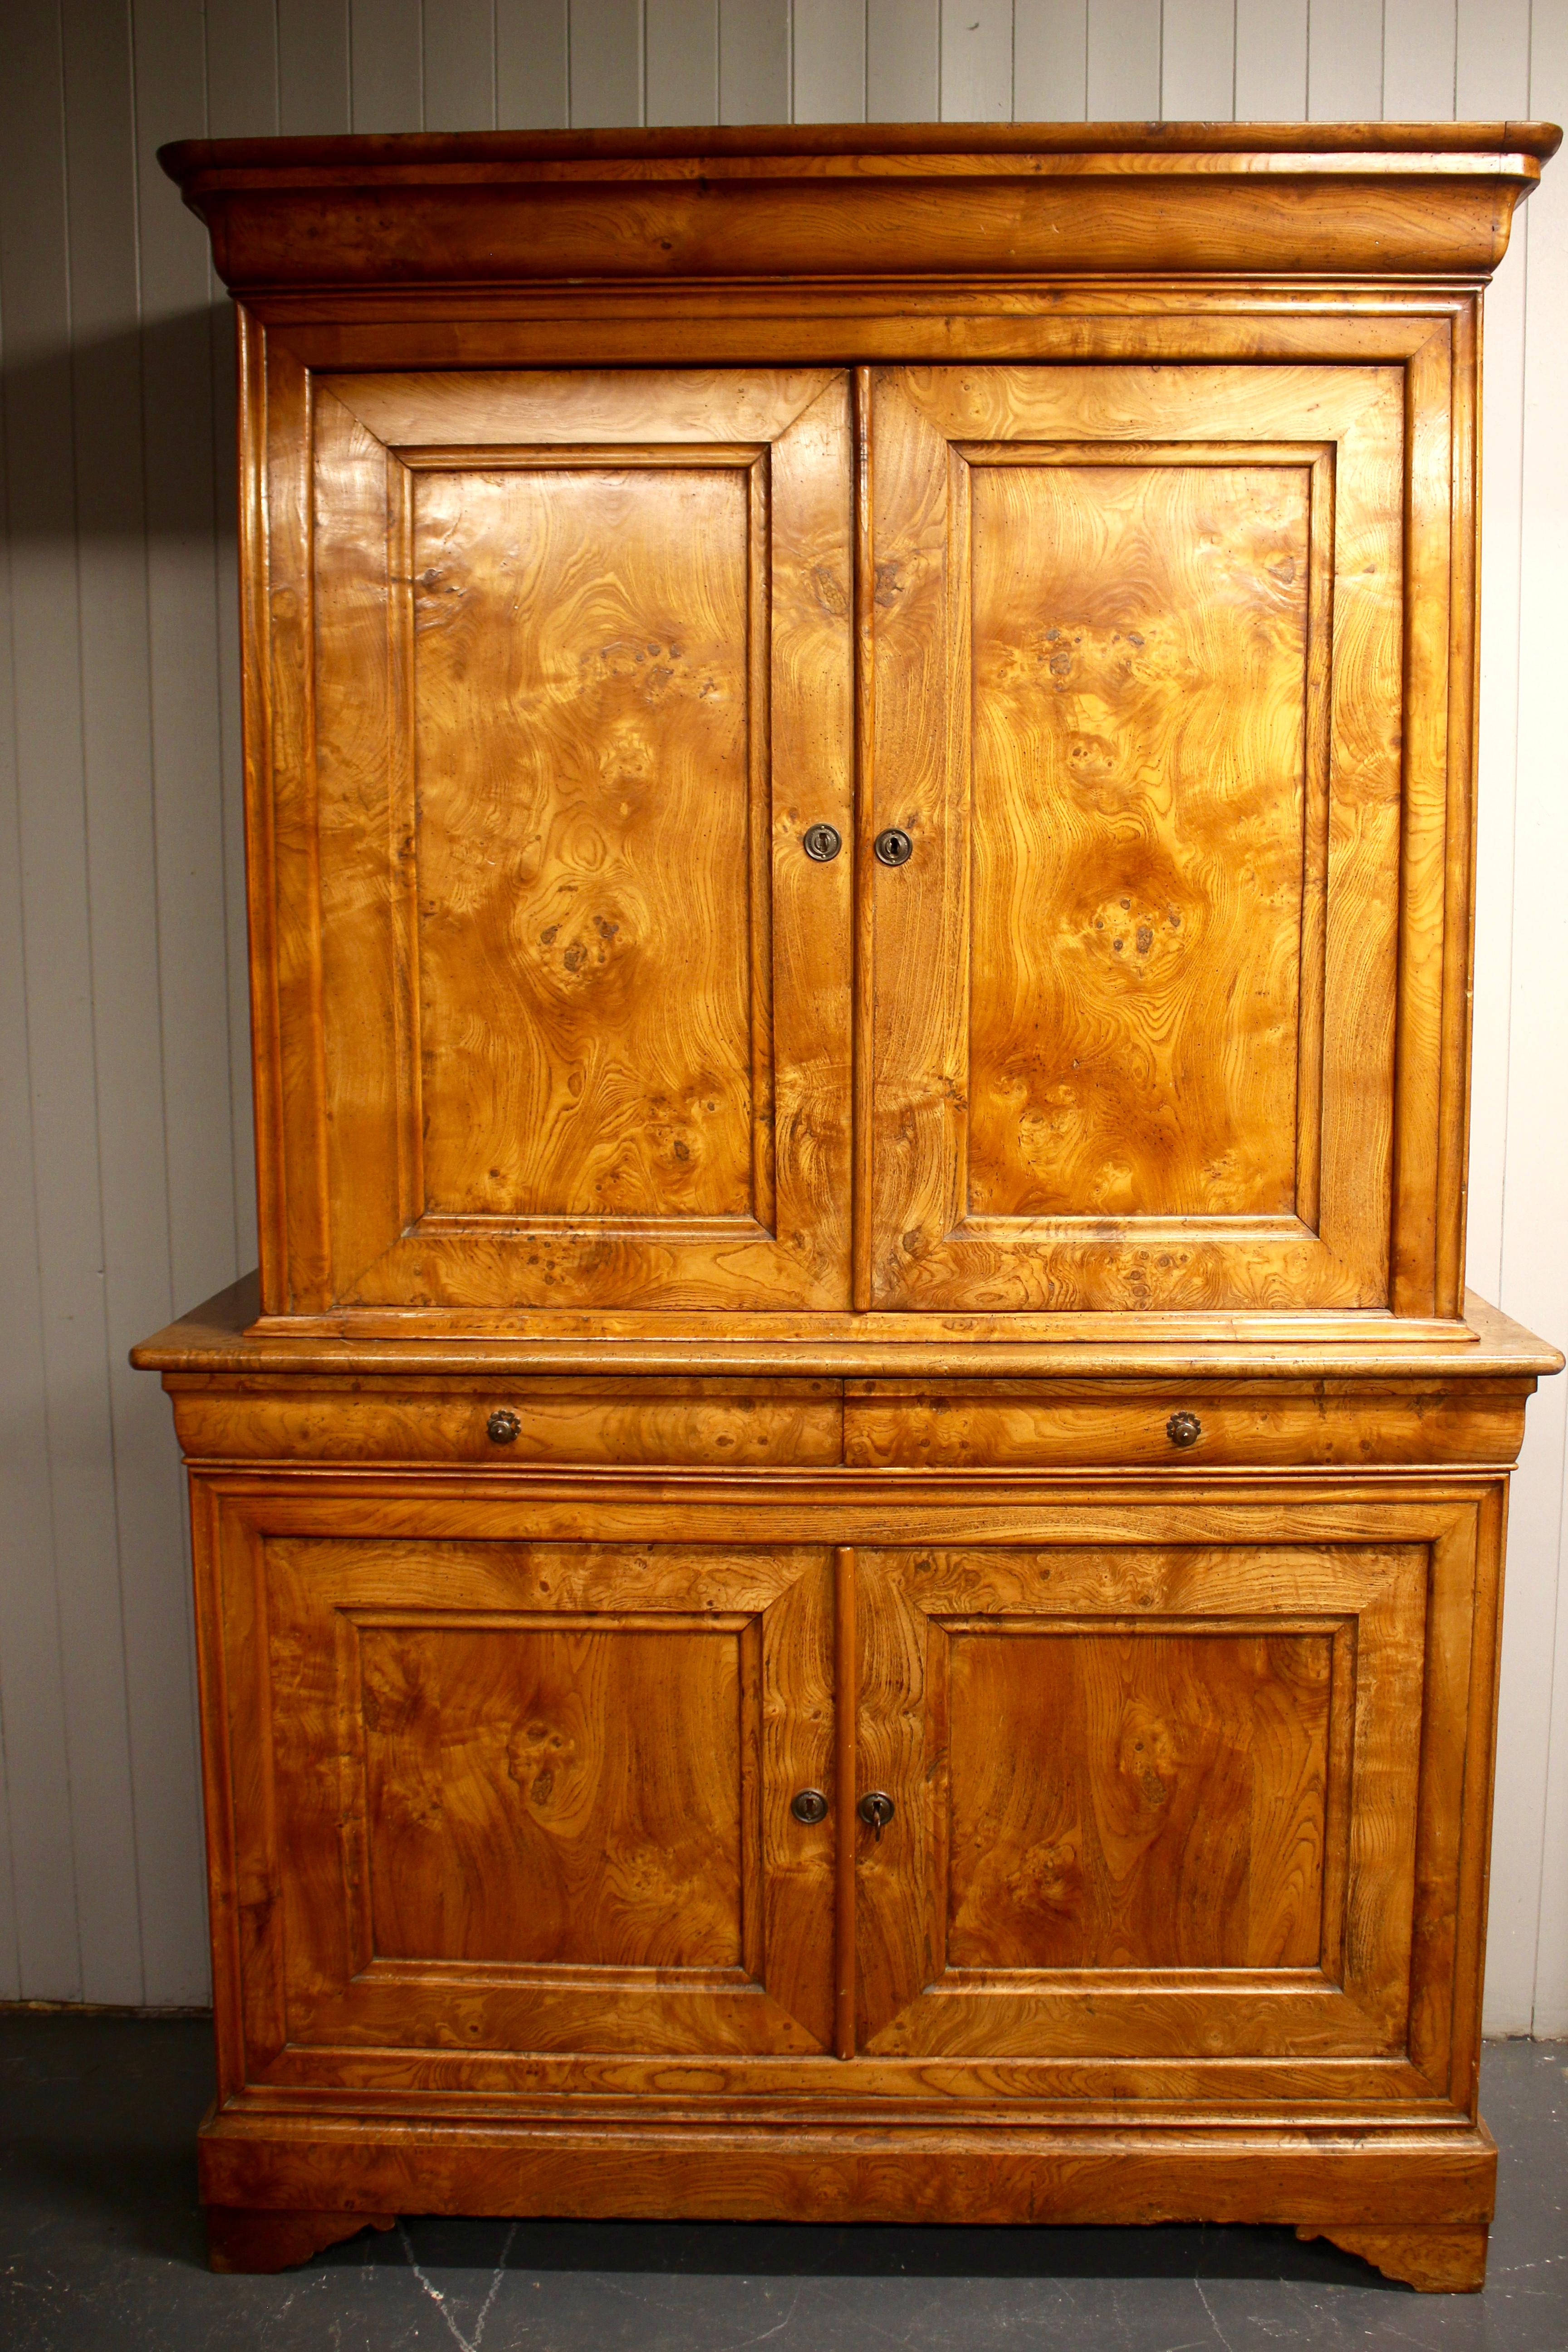 A delightful antique French chestnut cupboard or cabinet. Having beautiful classical lines with a wonderful color and grain. Topped with a Classic cyma recta cornice above panelled doors and sides enclosing fitted shelves. The centre section holding